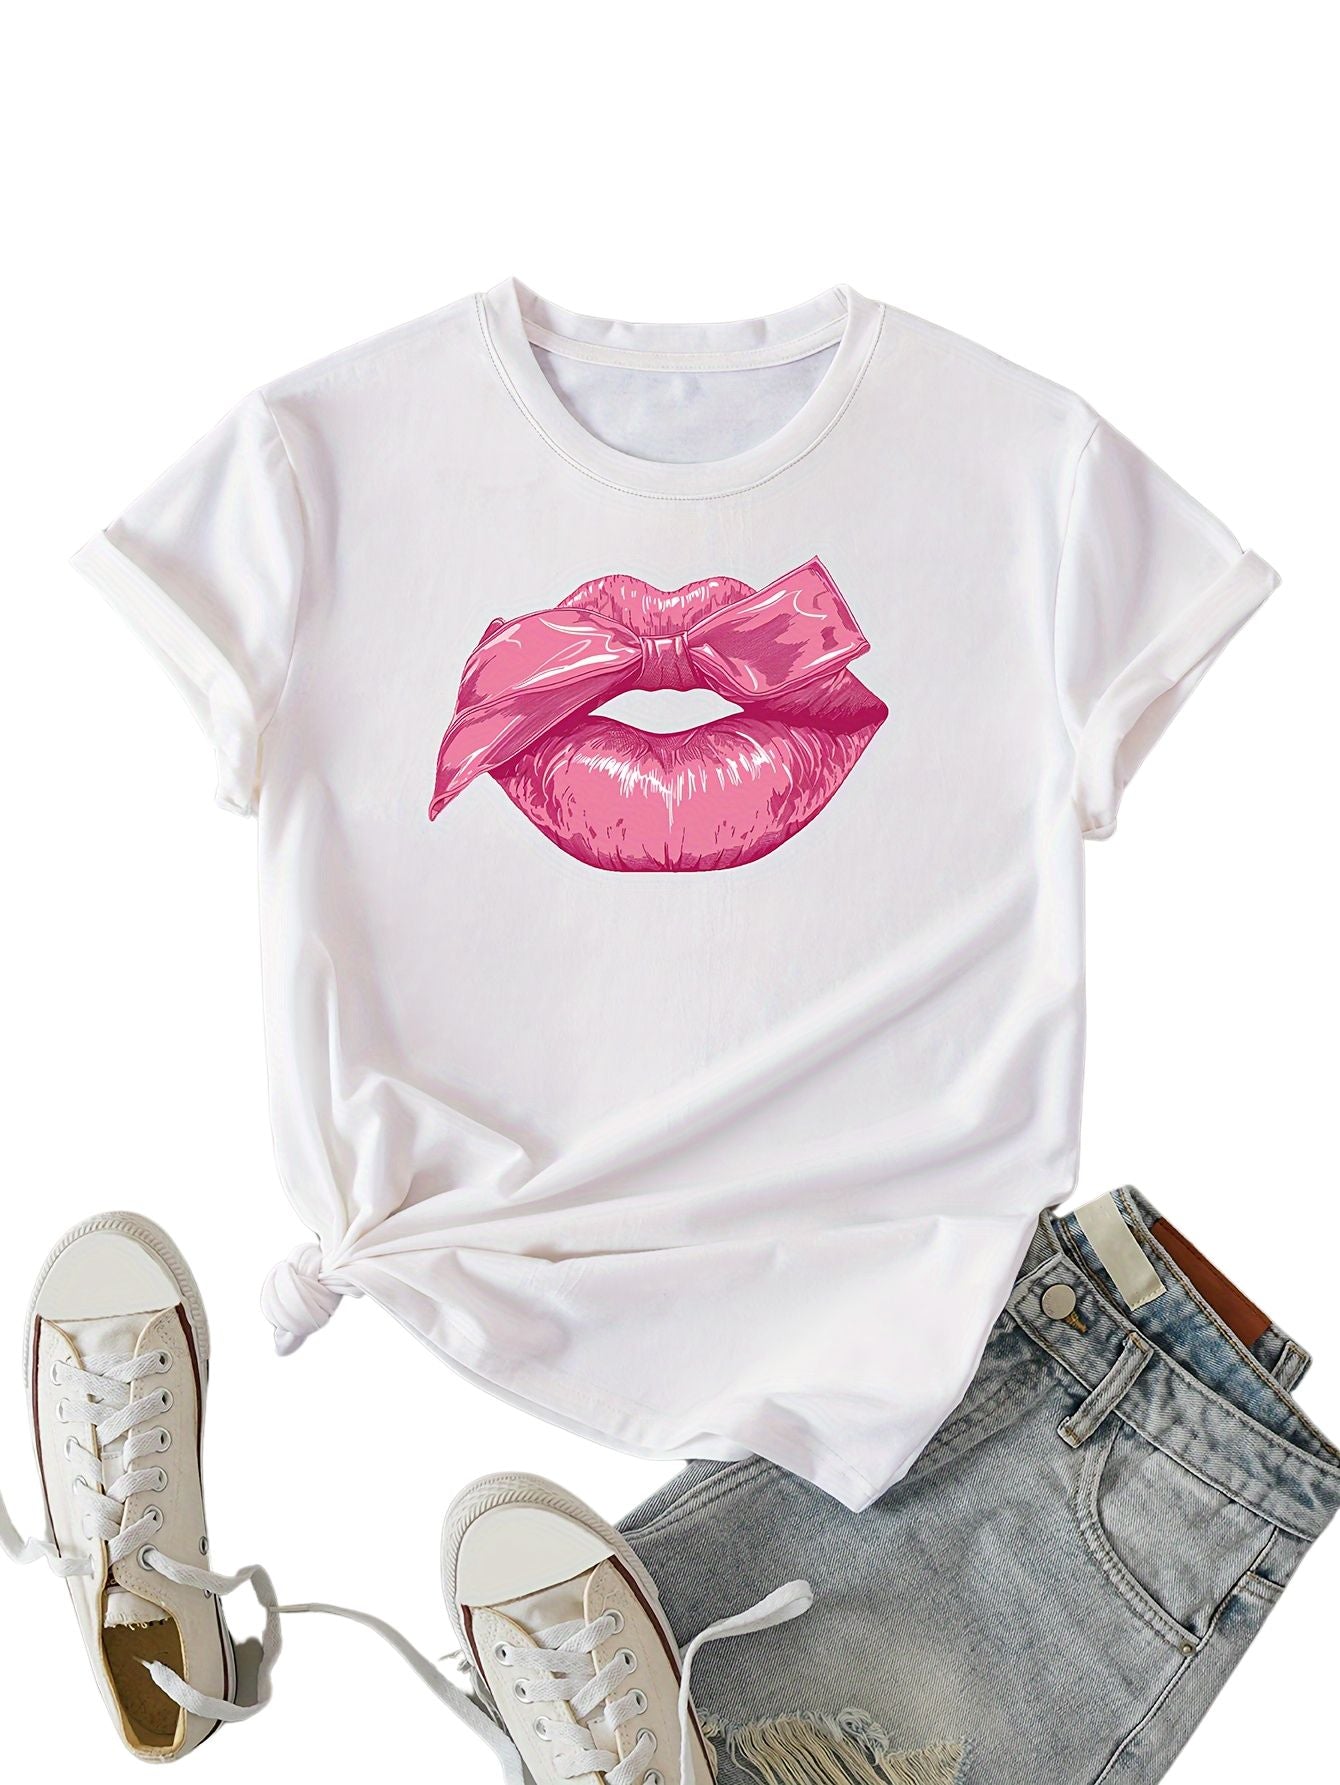 Lips Print T-shirt, Short Sleeve Crew Neck Casual Top For Summer & Spring, Women's Clothing